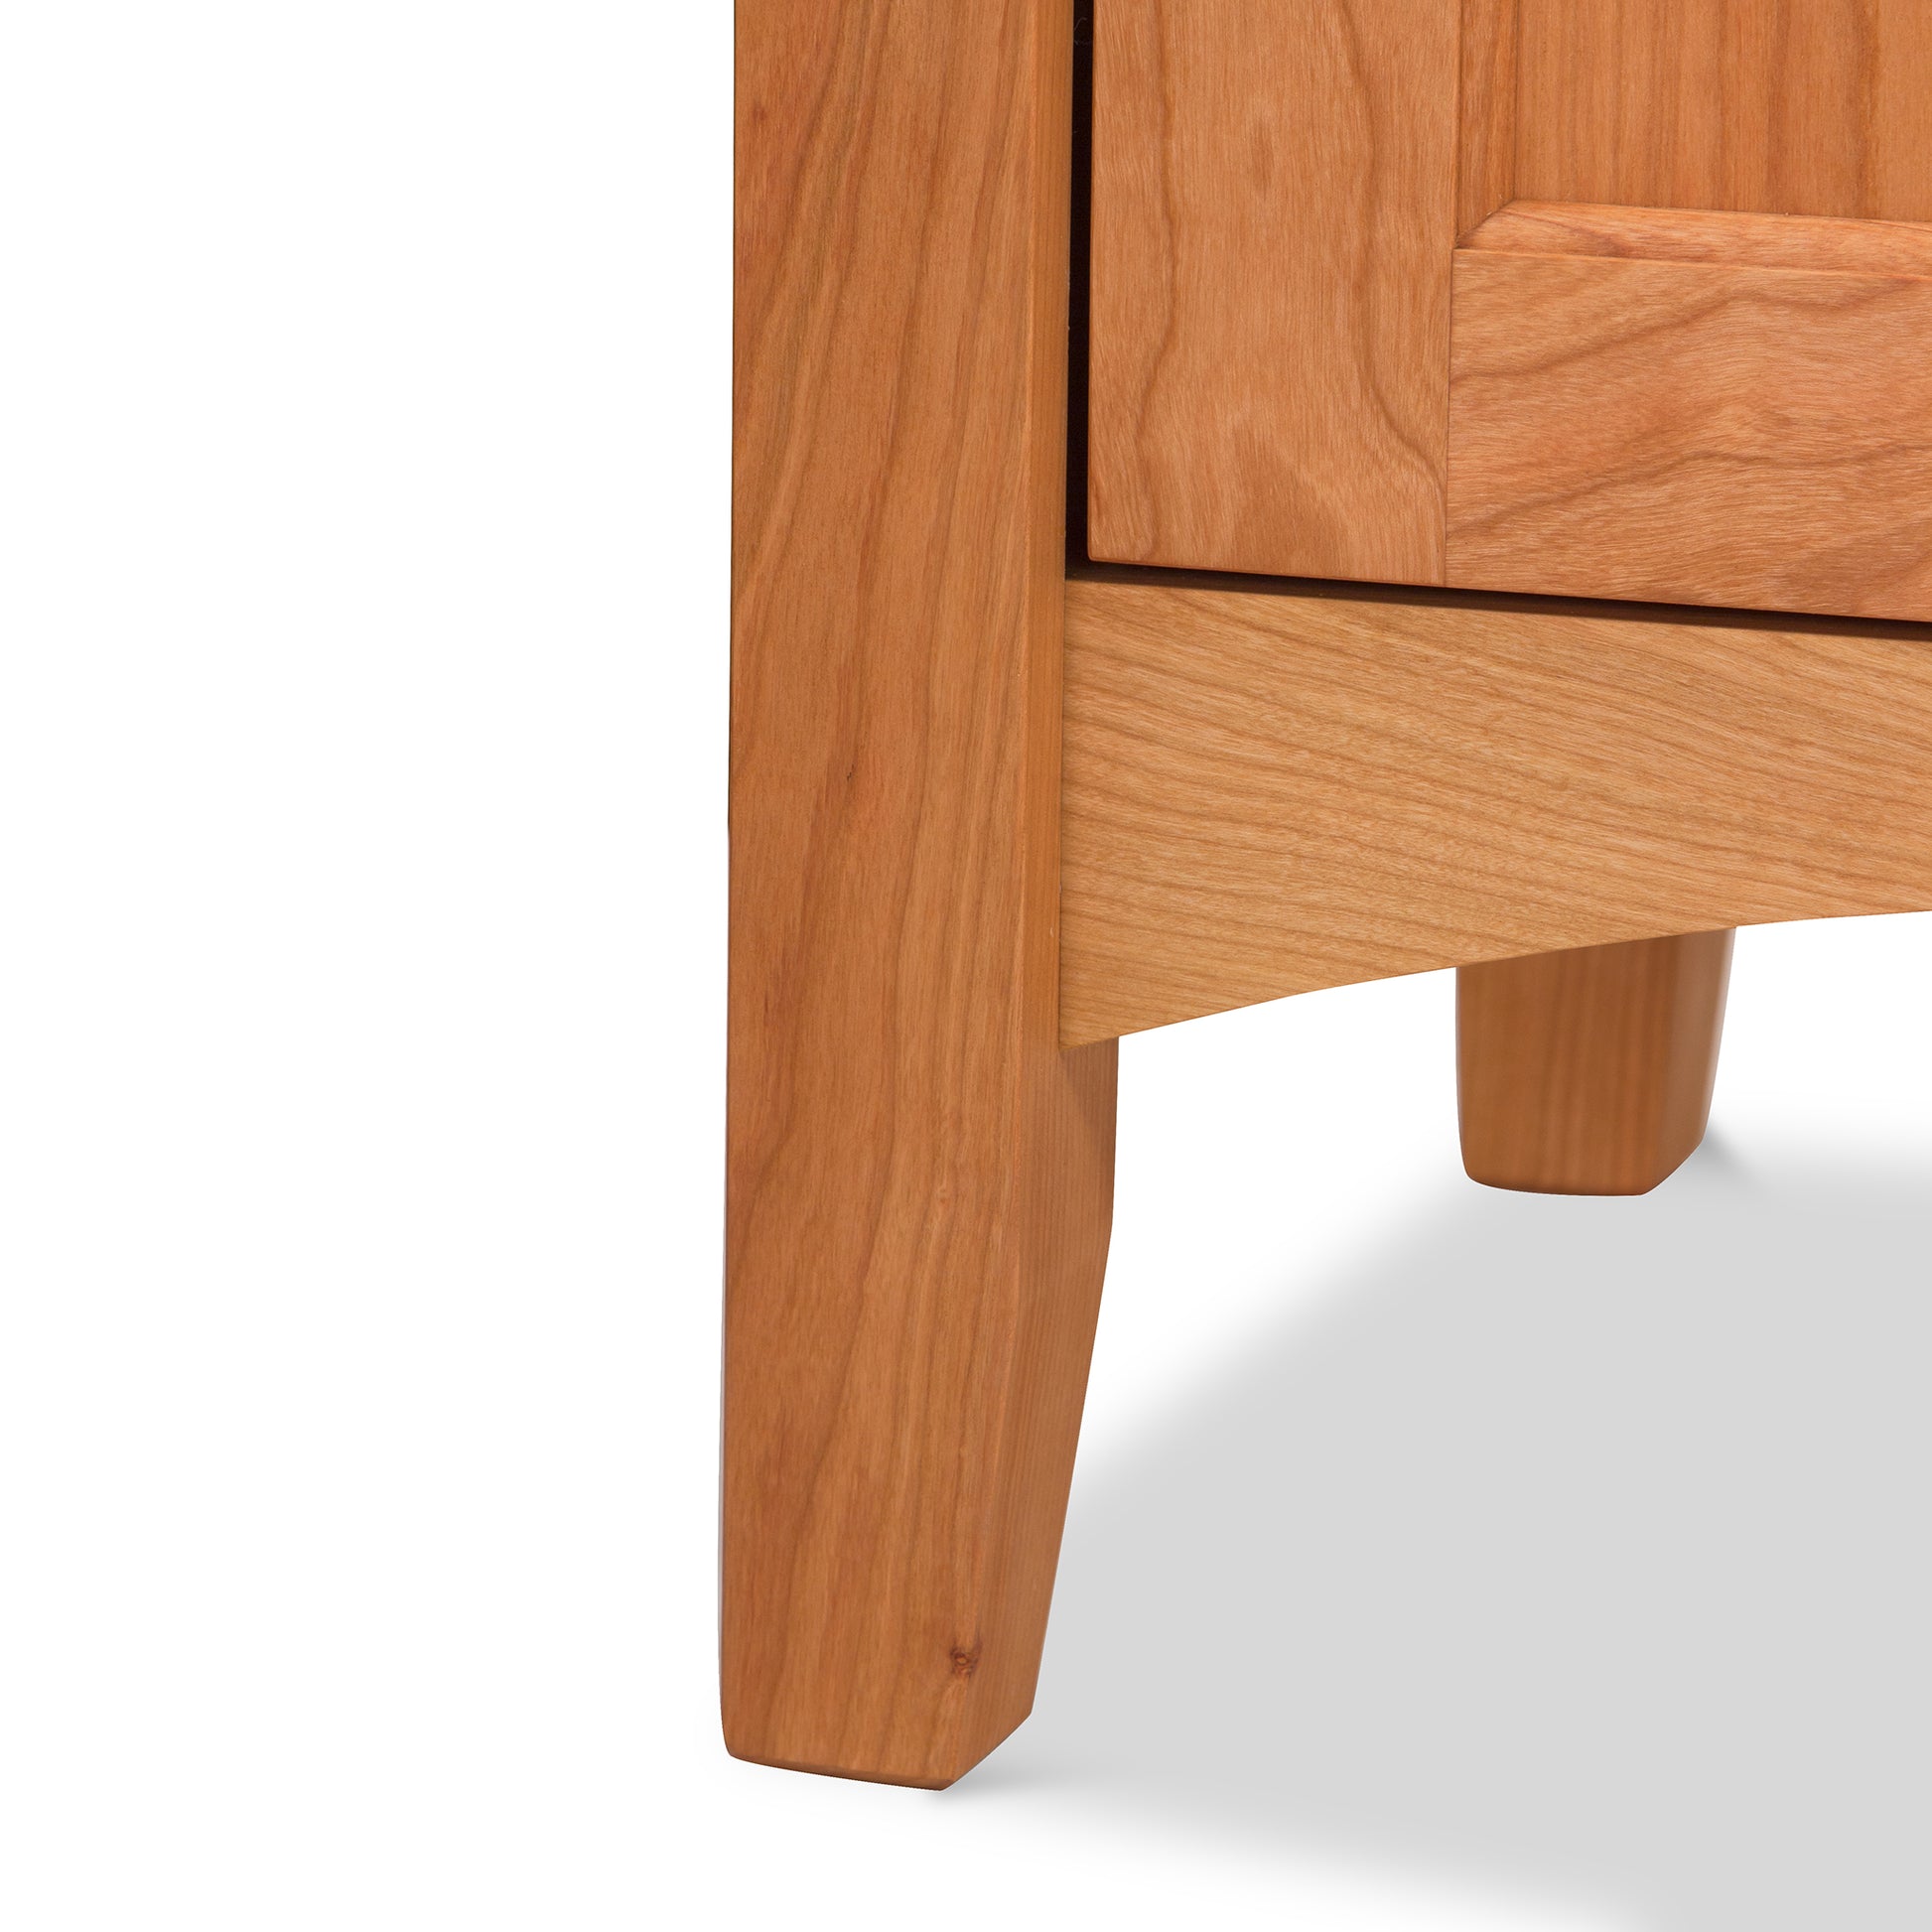 Close-up view of a Maple Corner Woodworks American Shaker 3-Drawer Nightstand featuring a smooth finish, showcasing two closed drawers with seamless hand pulls, set against a white background.